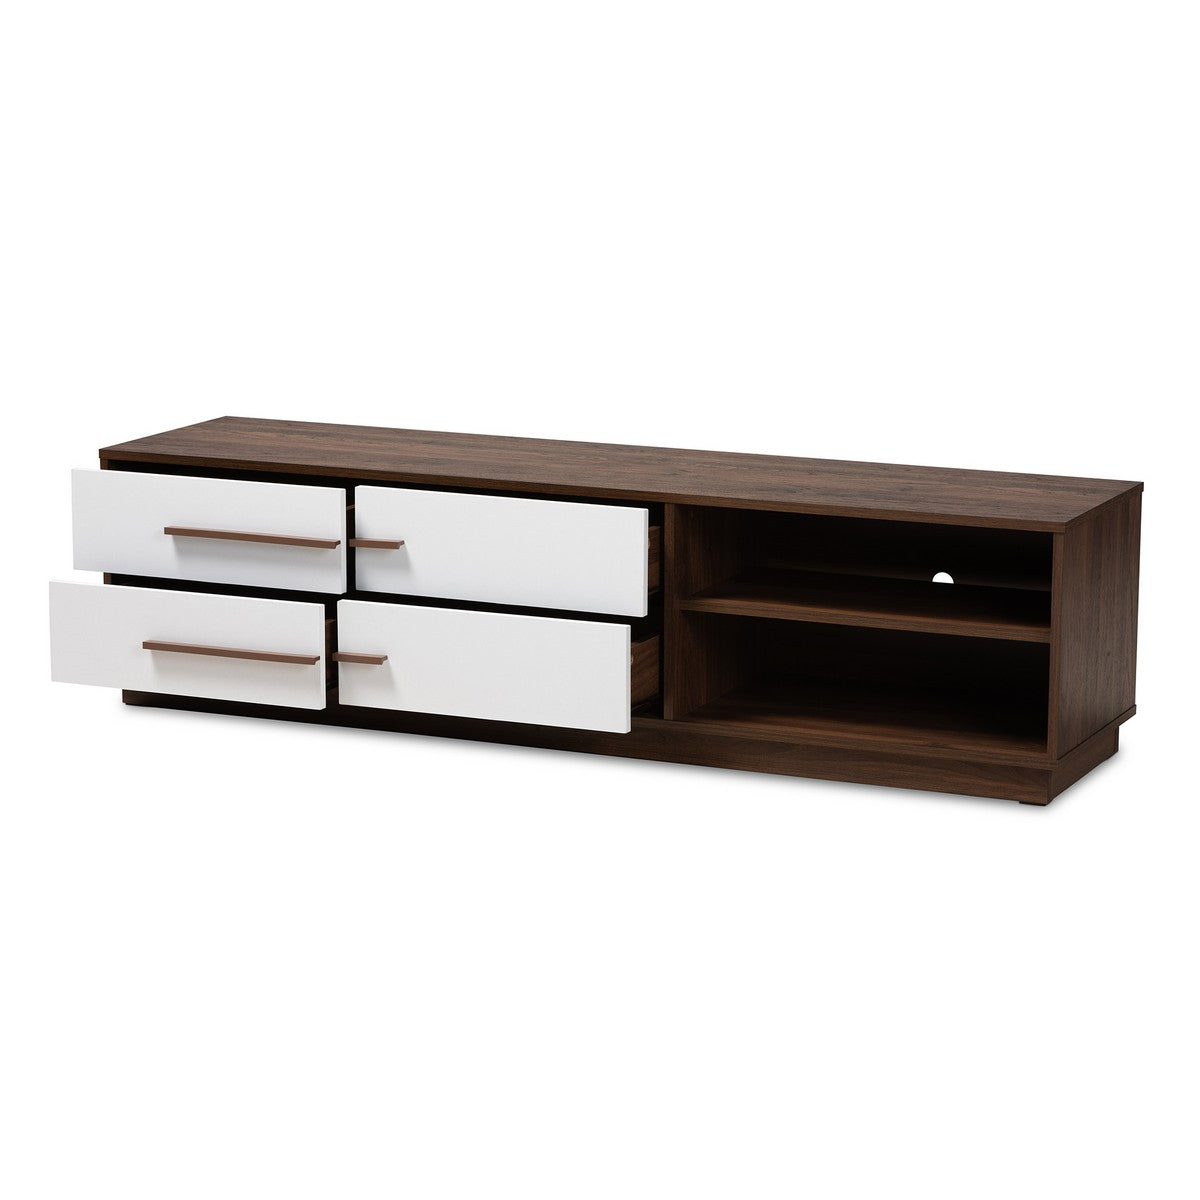 Baxton Studio Mette Mid-Century Modern Two-Tone White and Walnut Finished 4-Drawer Wood TV Stand Baxton Studio-TV Stands-Minimal And Modern - 1